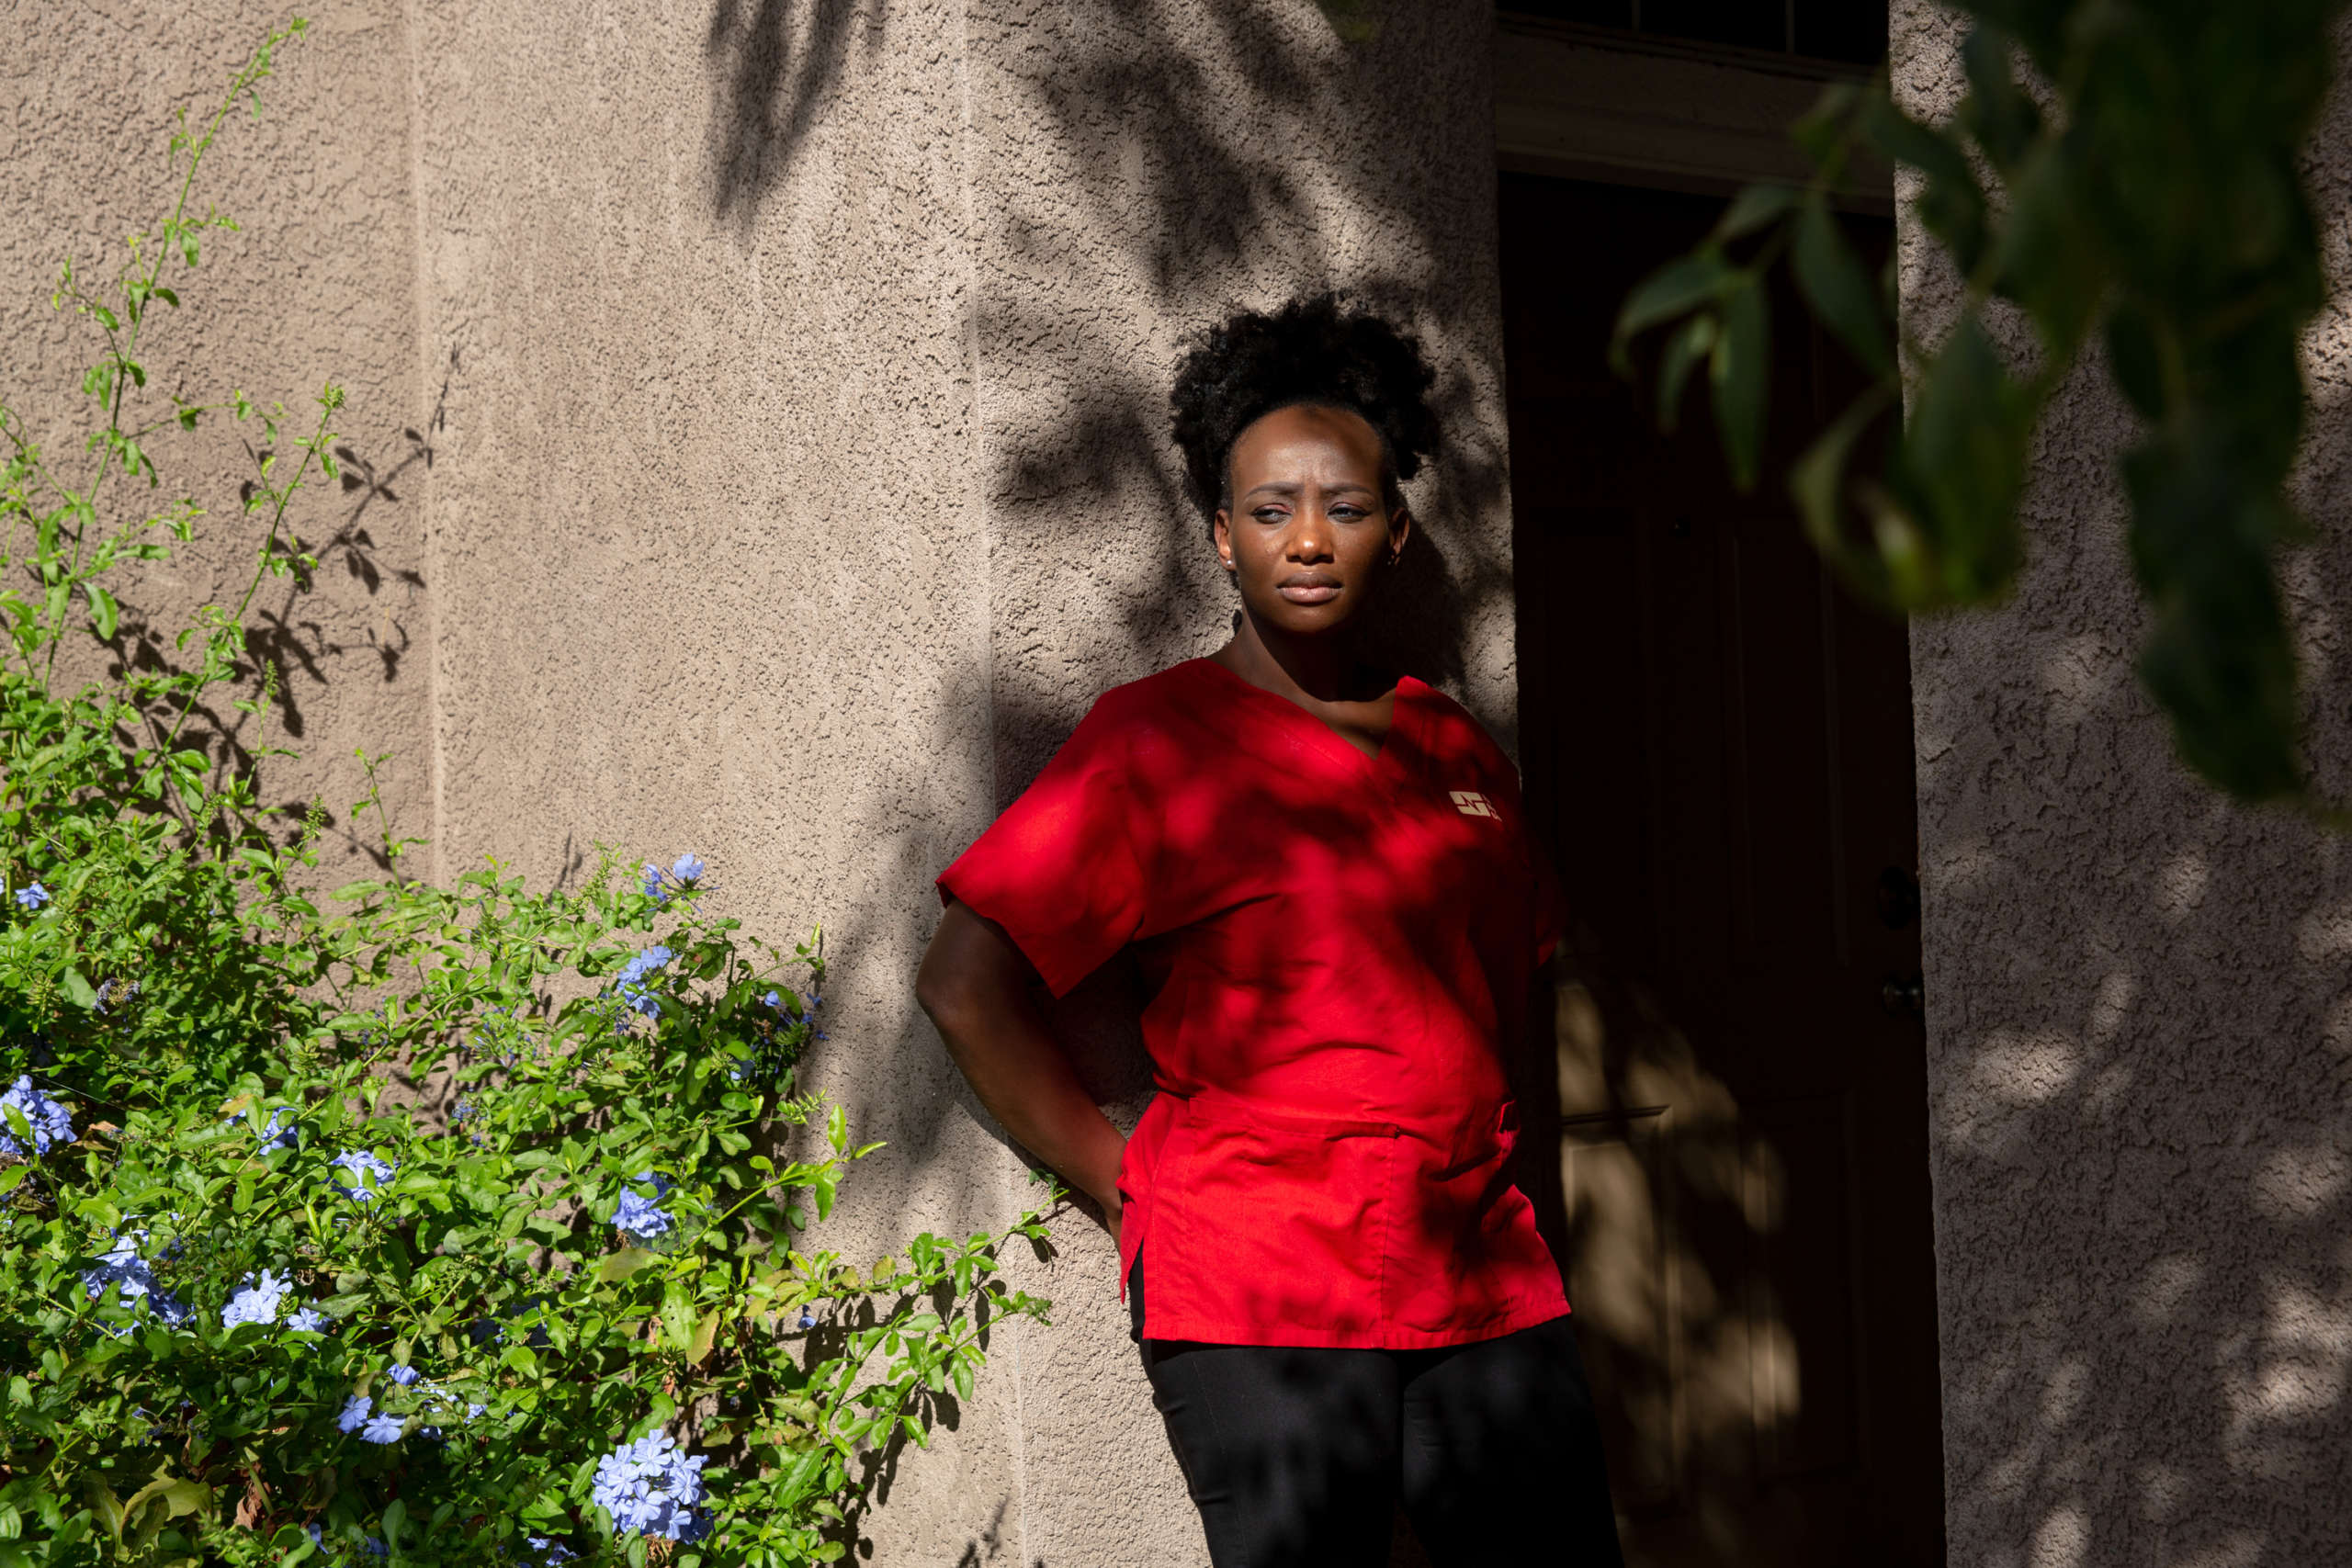 Mawata Kamara works as a nurse at San Leandro Hospital in San Leandro, California, where visitors have twice made gun threats against staffers in the emergency department since the pandemic began. She and other hospital workers call it part of a worrying trend.